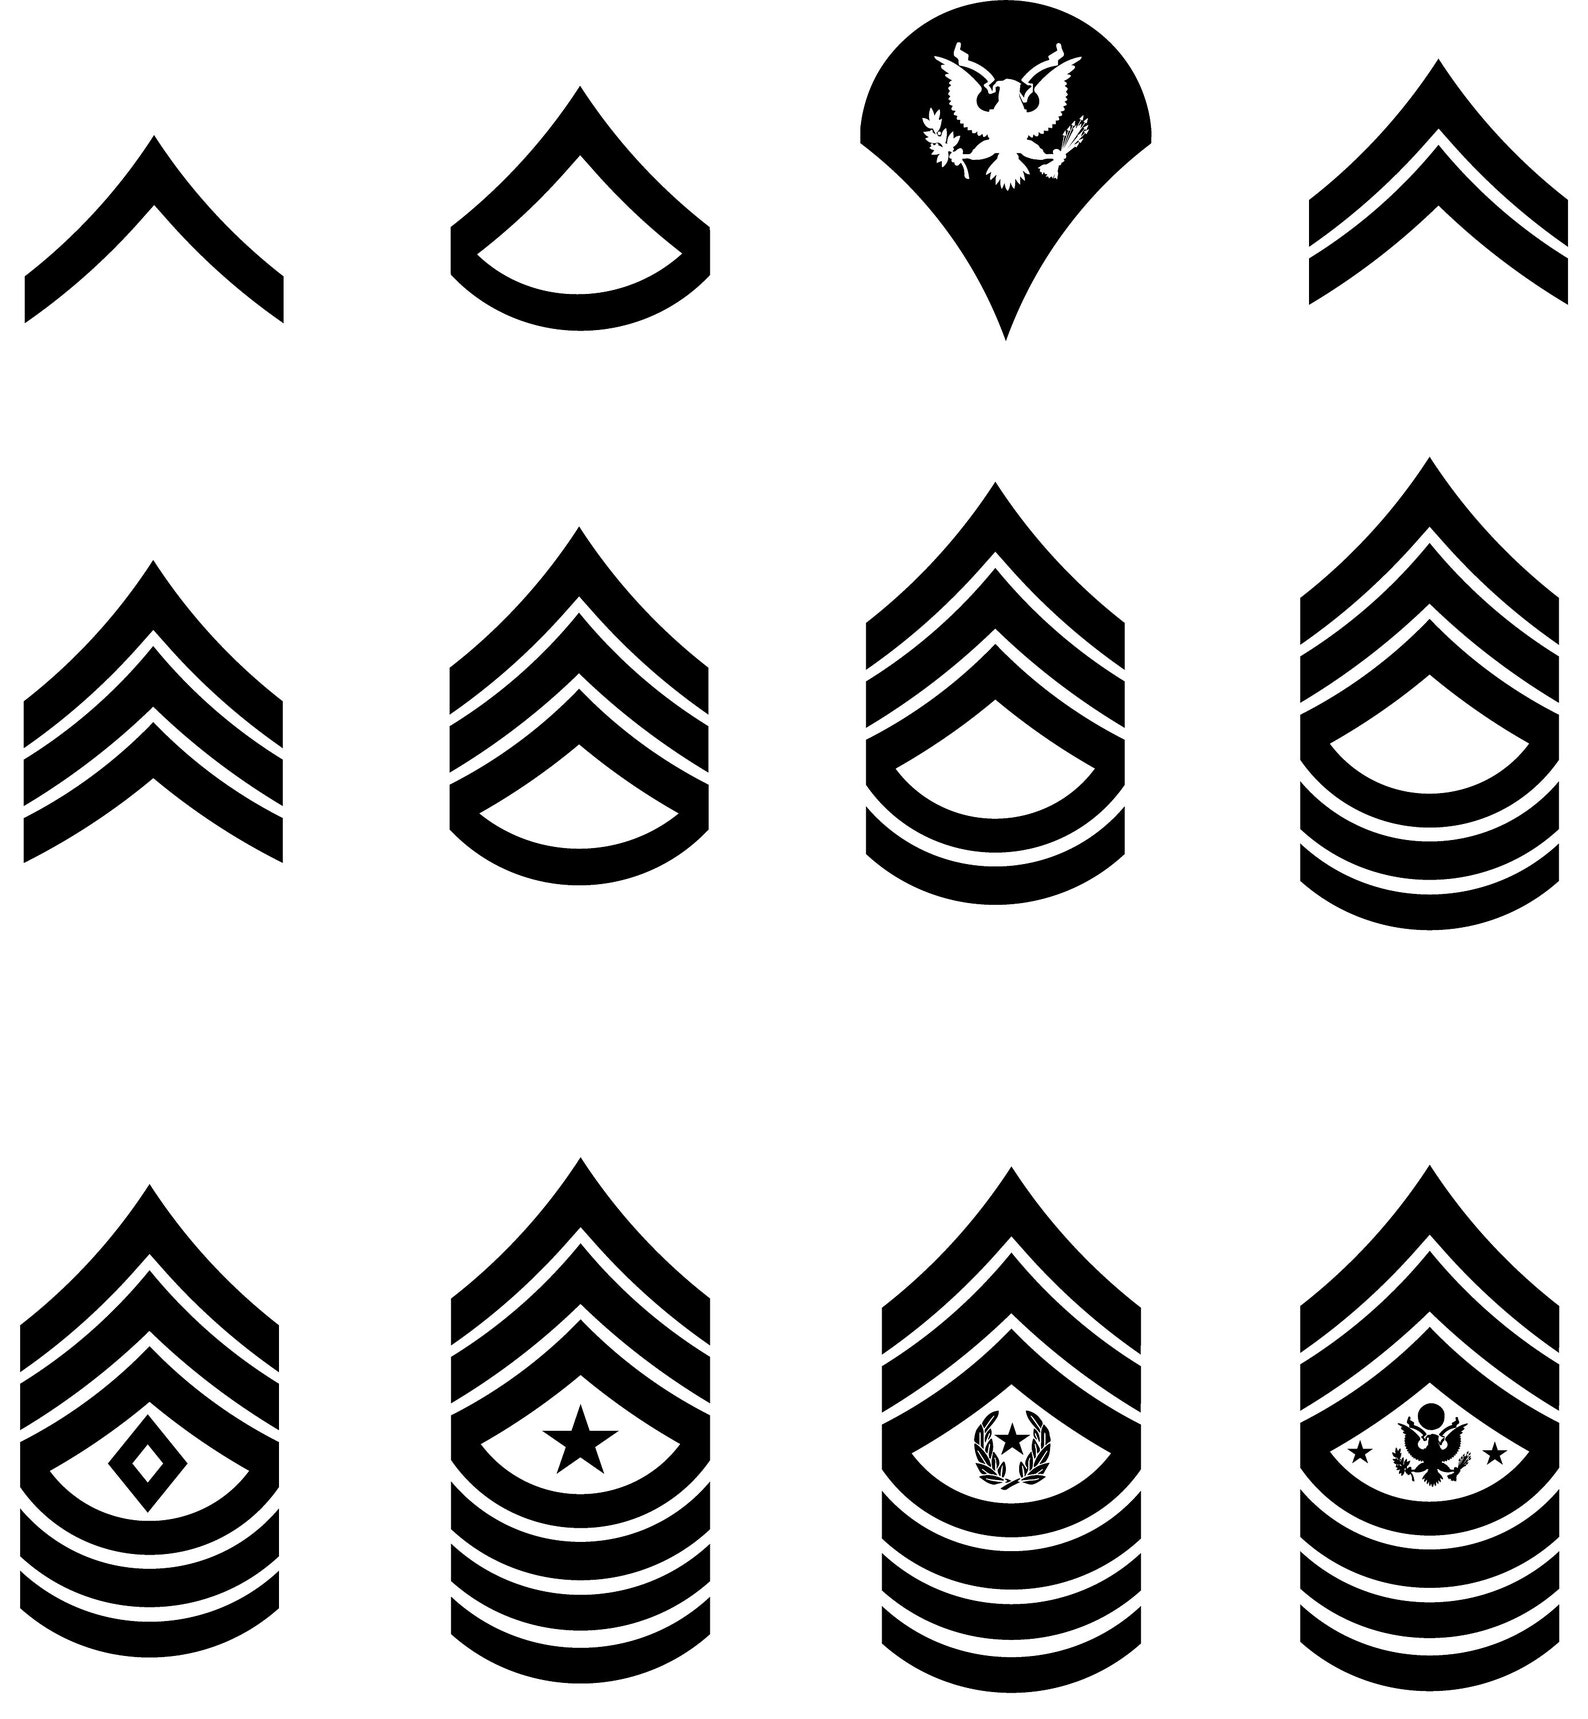 Us Army Enlisted Rank Insignia Svg File All In One Photos | Sexiz Pix